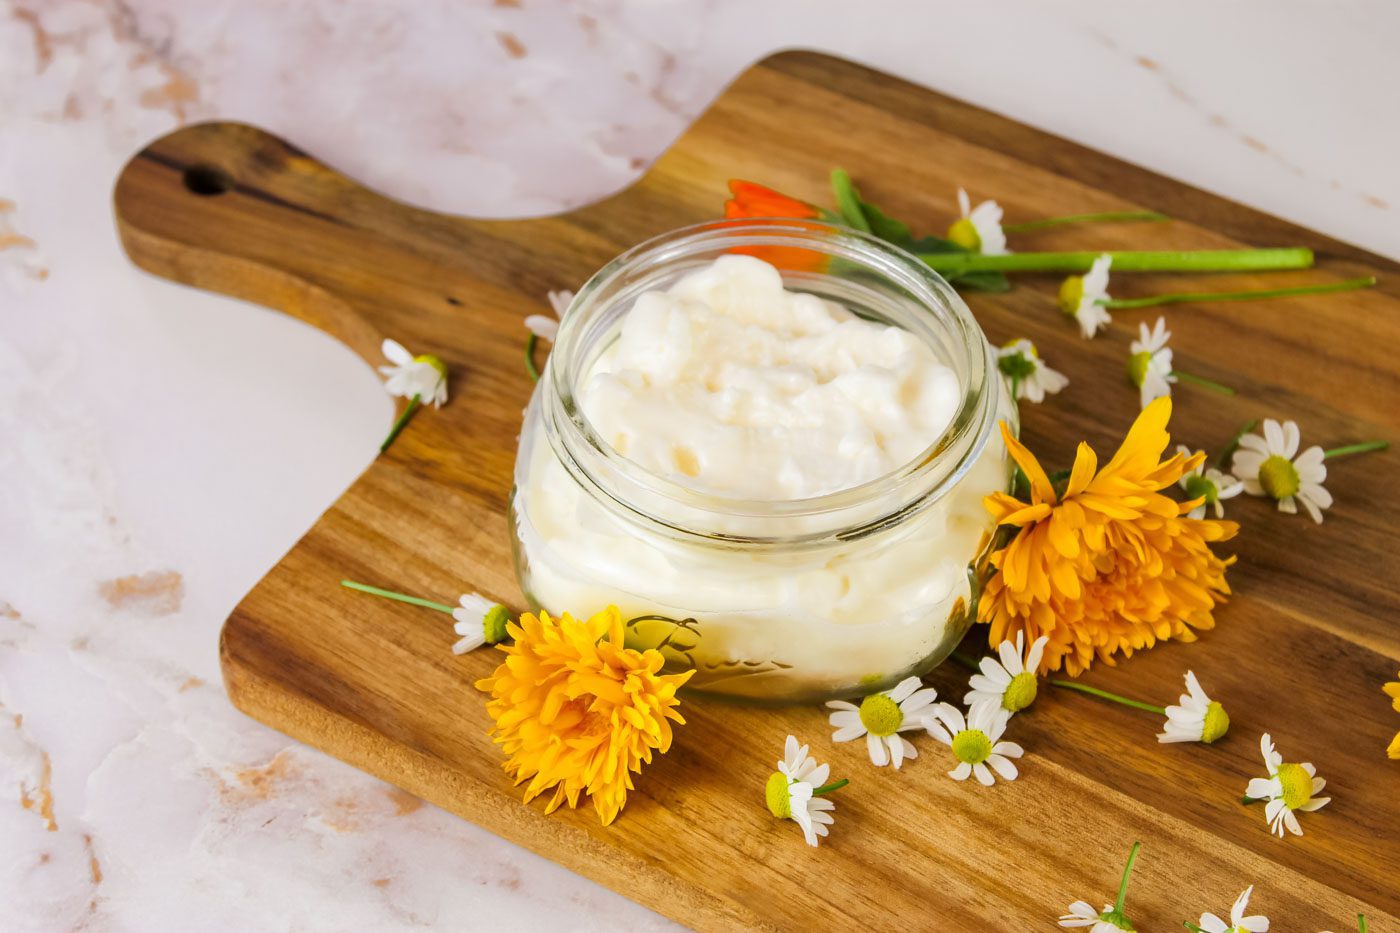 glass mason jar filled with homemade whipped body butter sits surrounded by fresh flowers